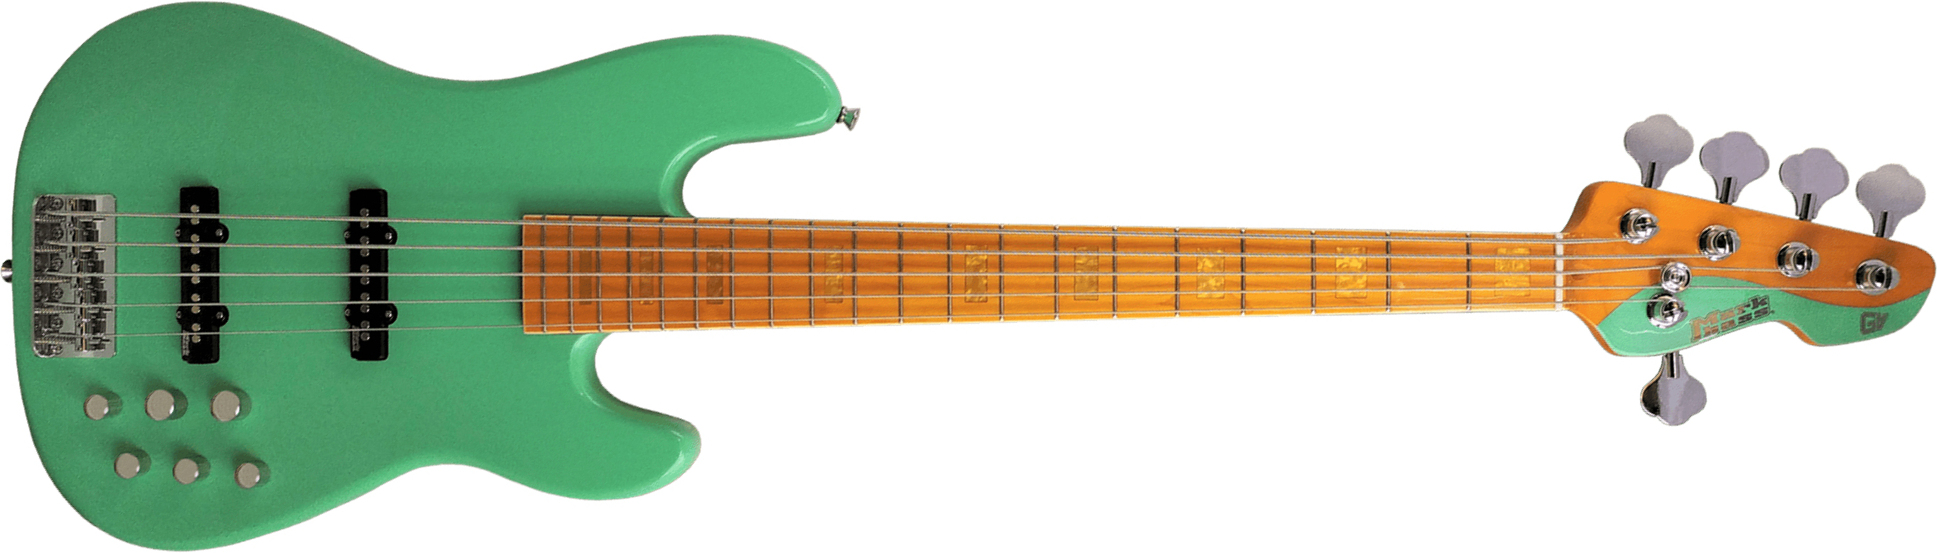 Markbass Mb Gv 5 Gloxy Val Cr Mp 5c Active Mn - Surf Green - Solid body electric bass - Main picture